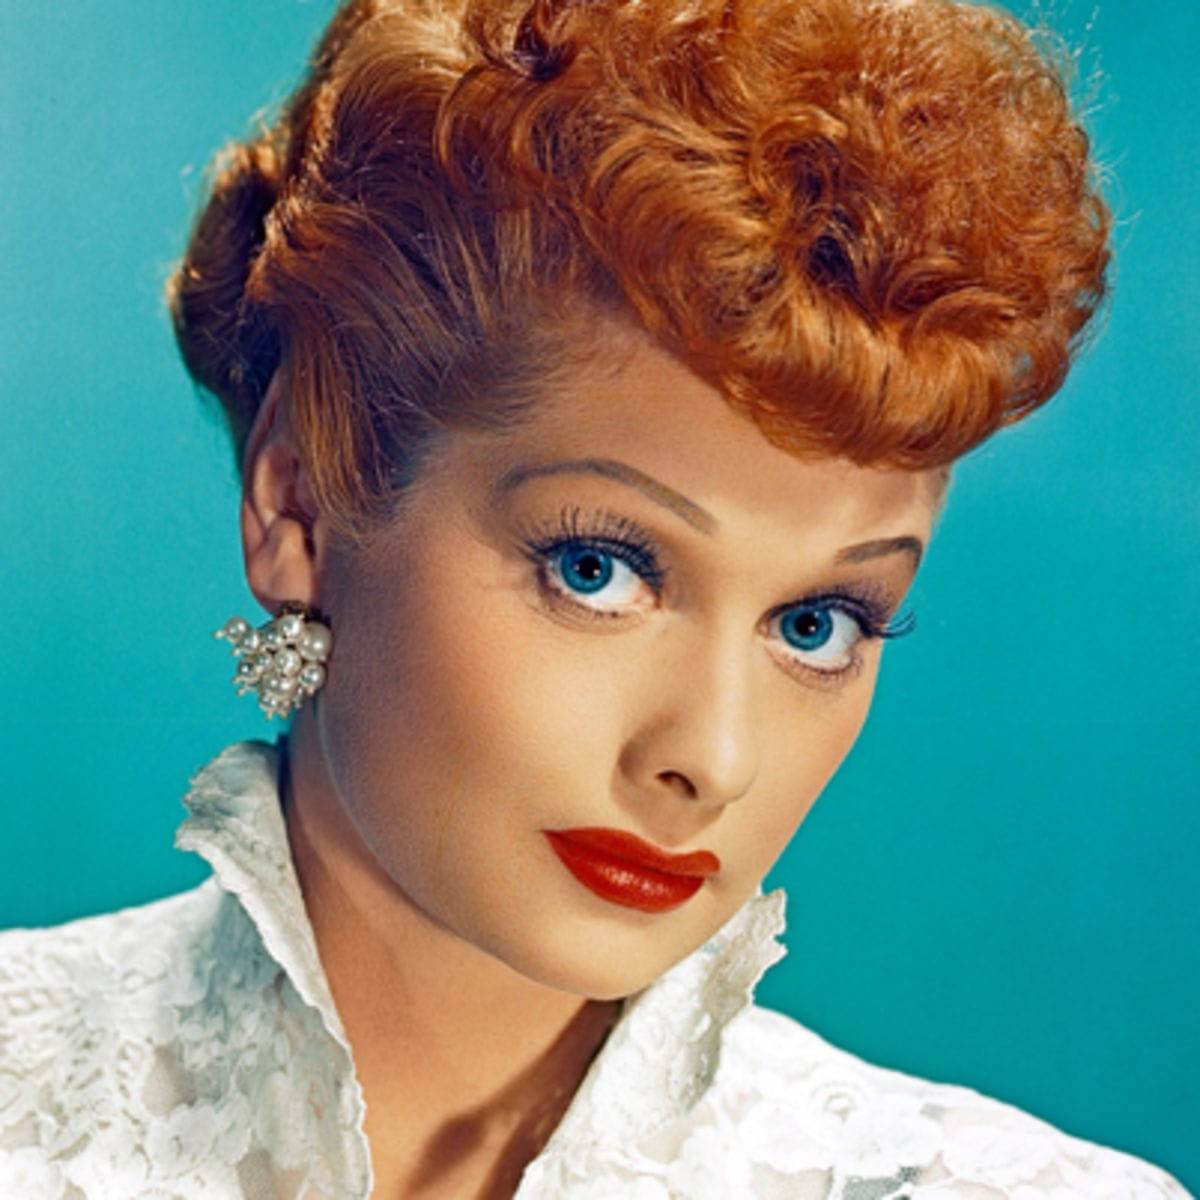 Timeless Beauty of Comedy - A Portrait of Lucille Ball Wallpaper